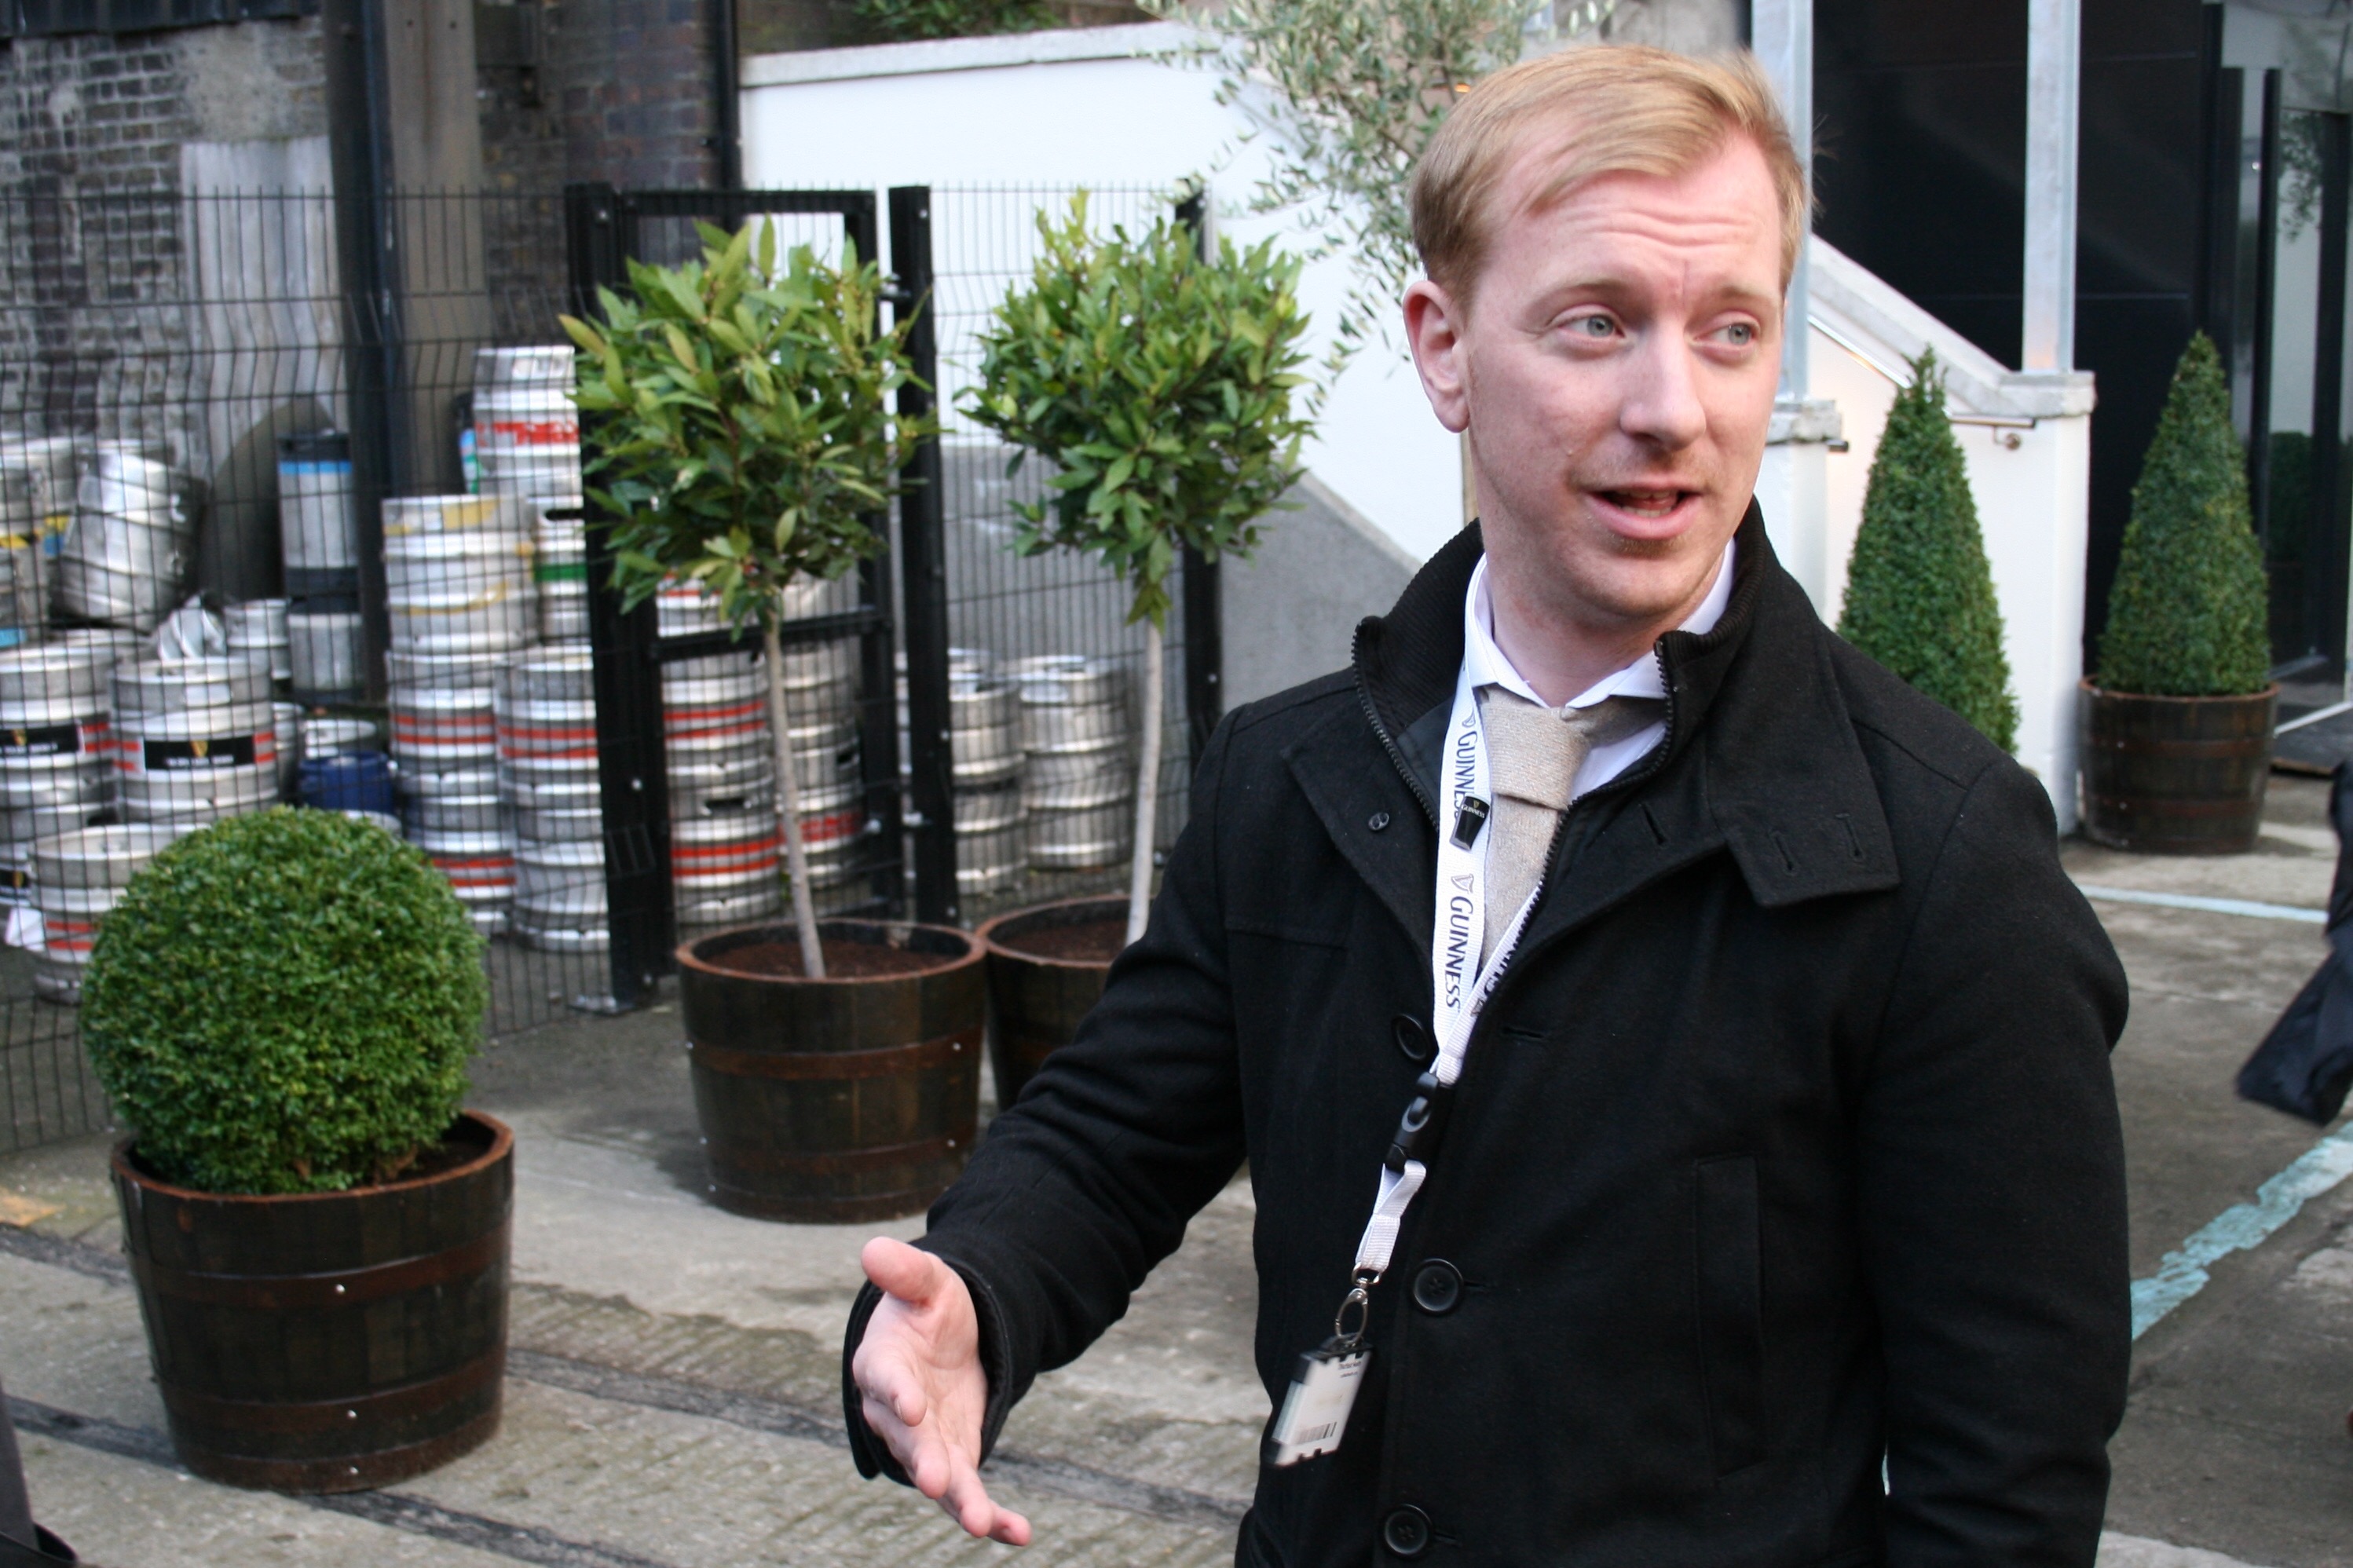 Domhnall Marnell leading us to The Open Gate Brewery at St. James's Gate to drink more Guinness.